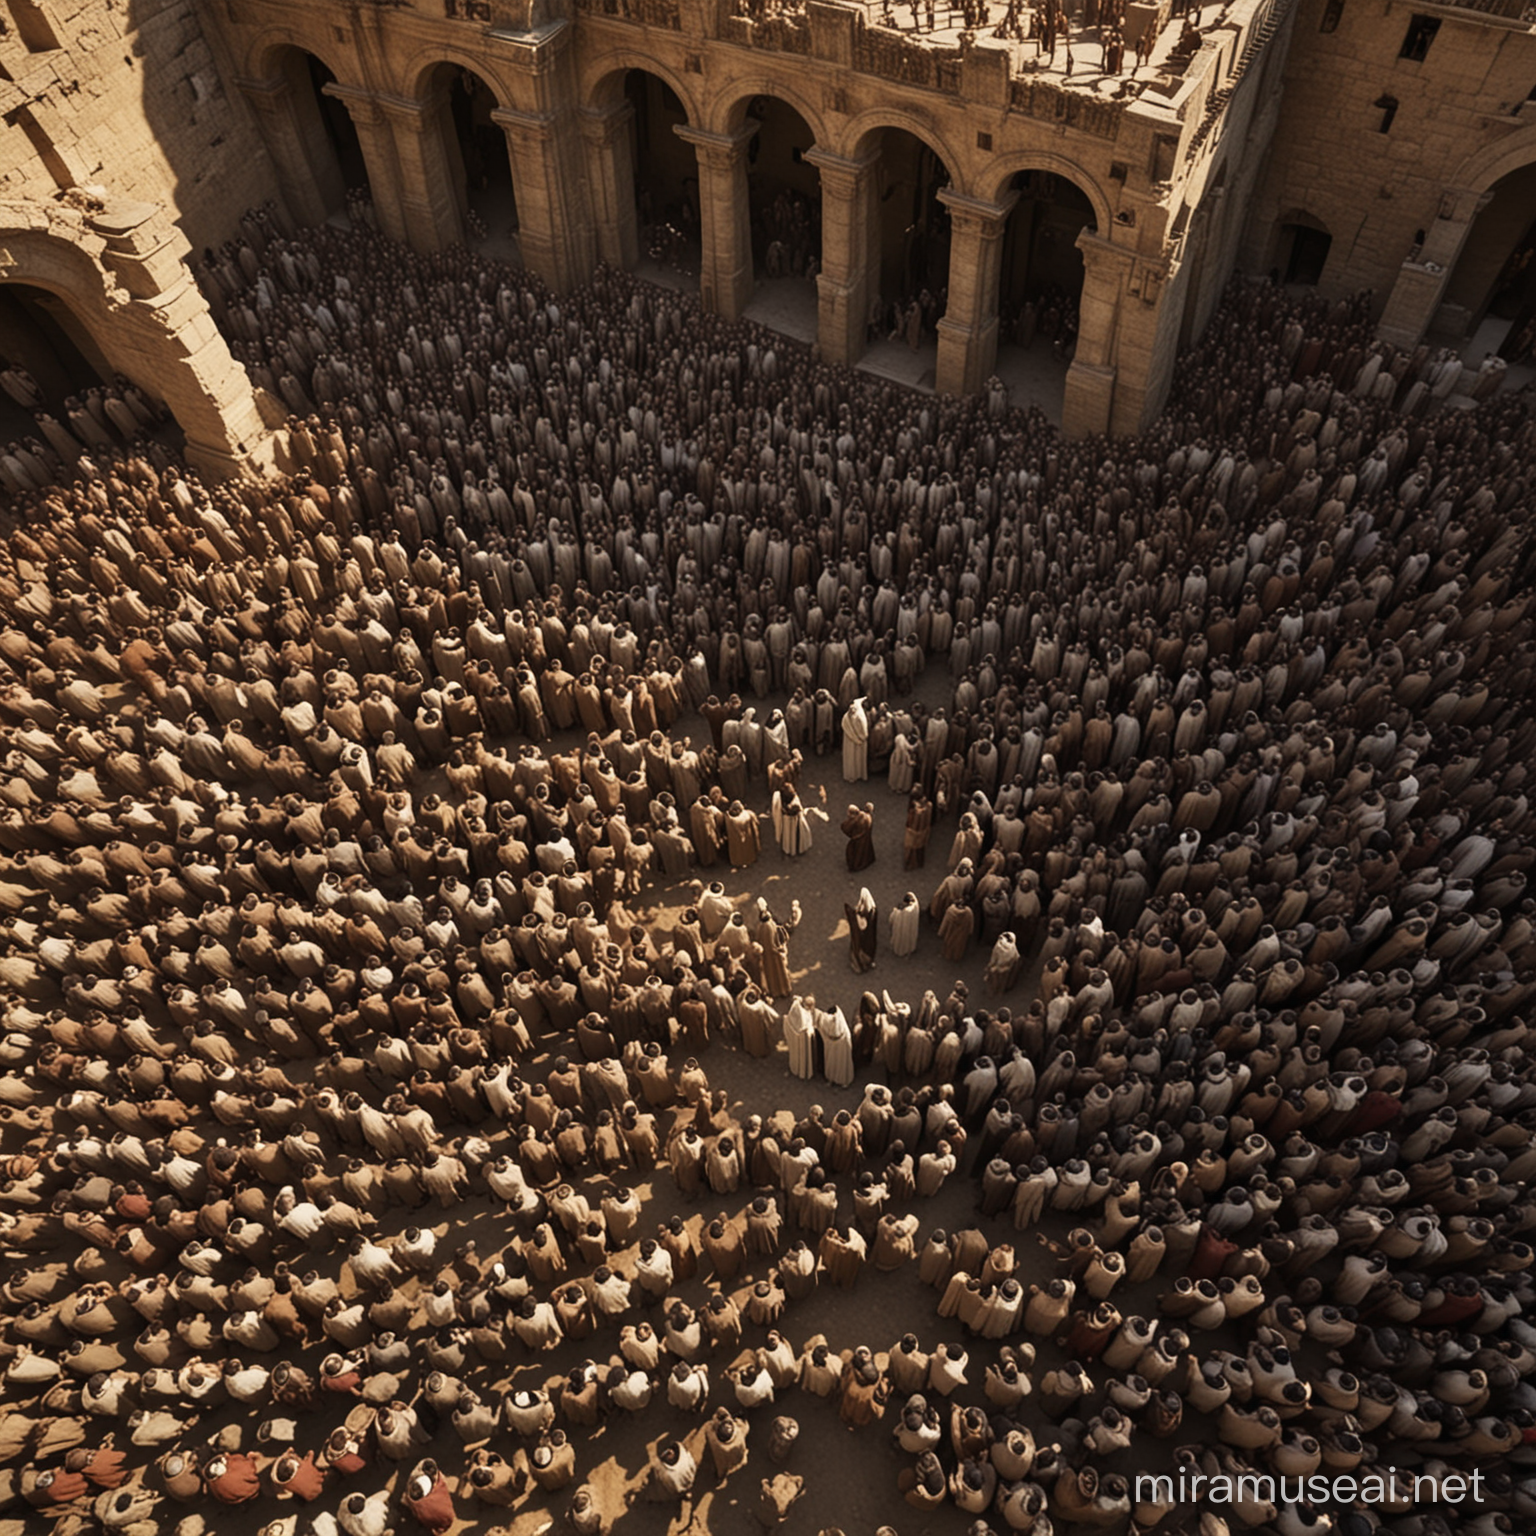 create image of Jesus speaking to his followers , 4k resolution, more realistic, based on the movie The Passion of the Christ, large crowd, ancient city, aerial, top down view, like from a drone